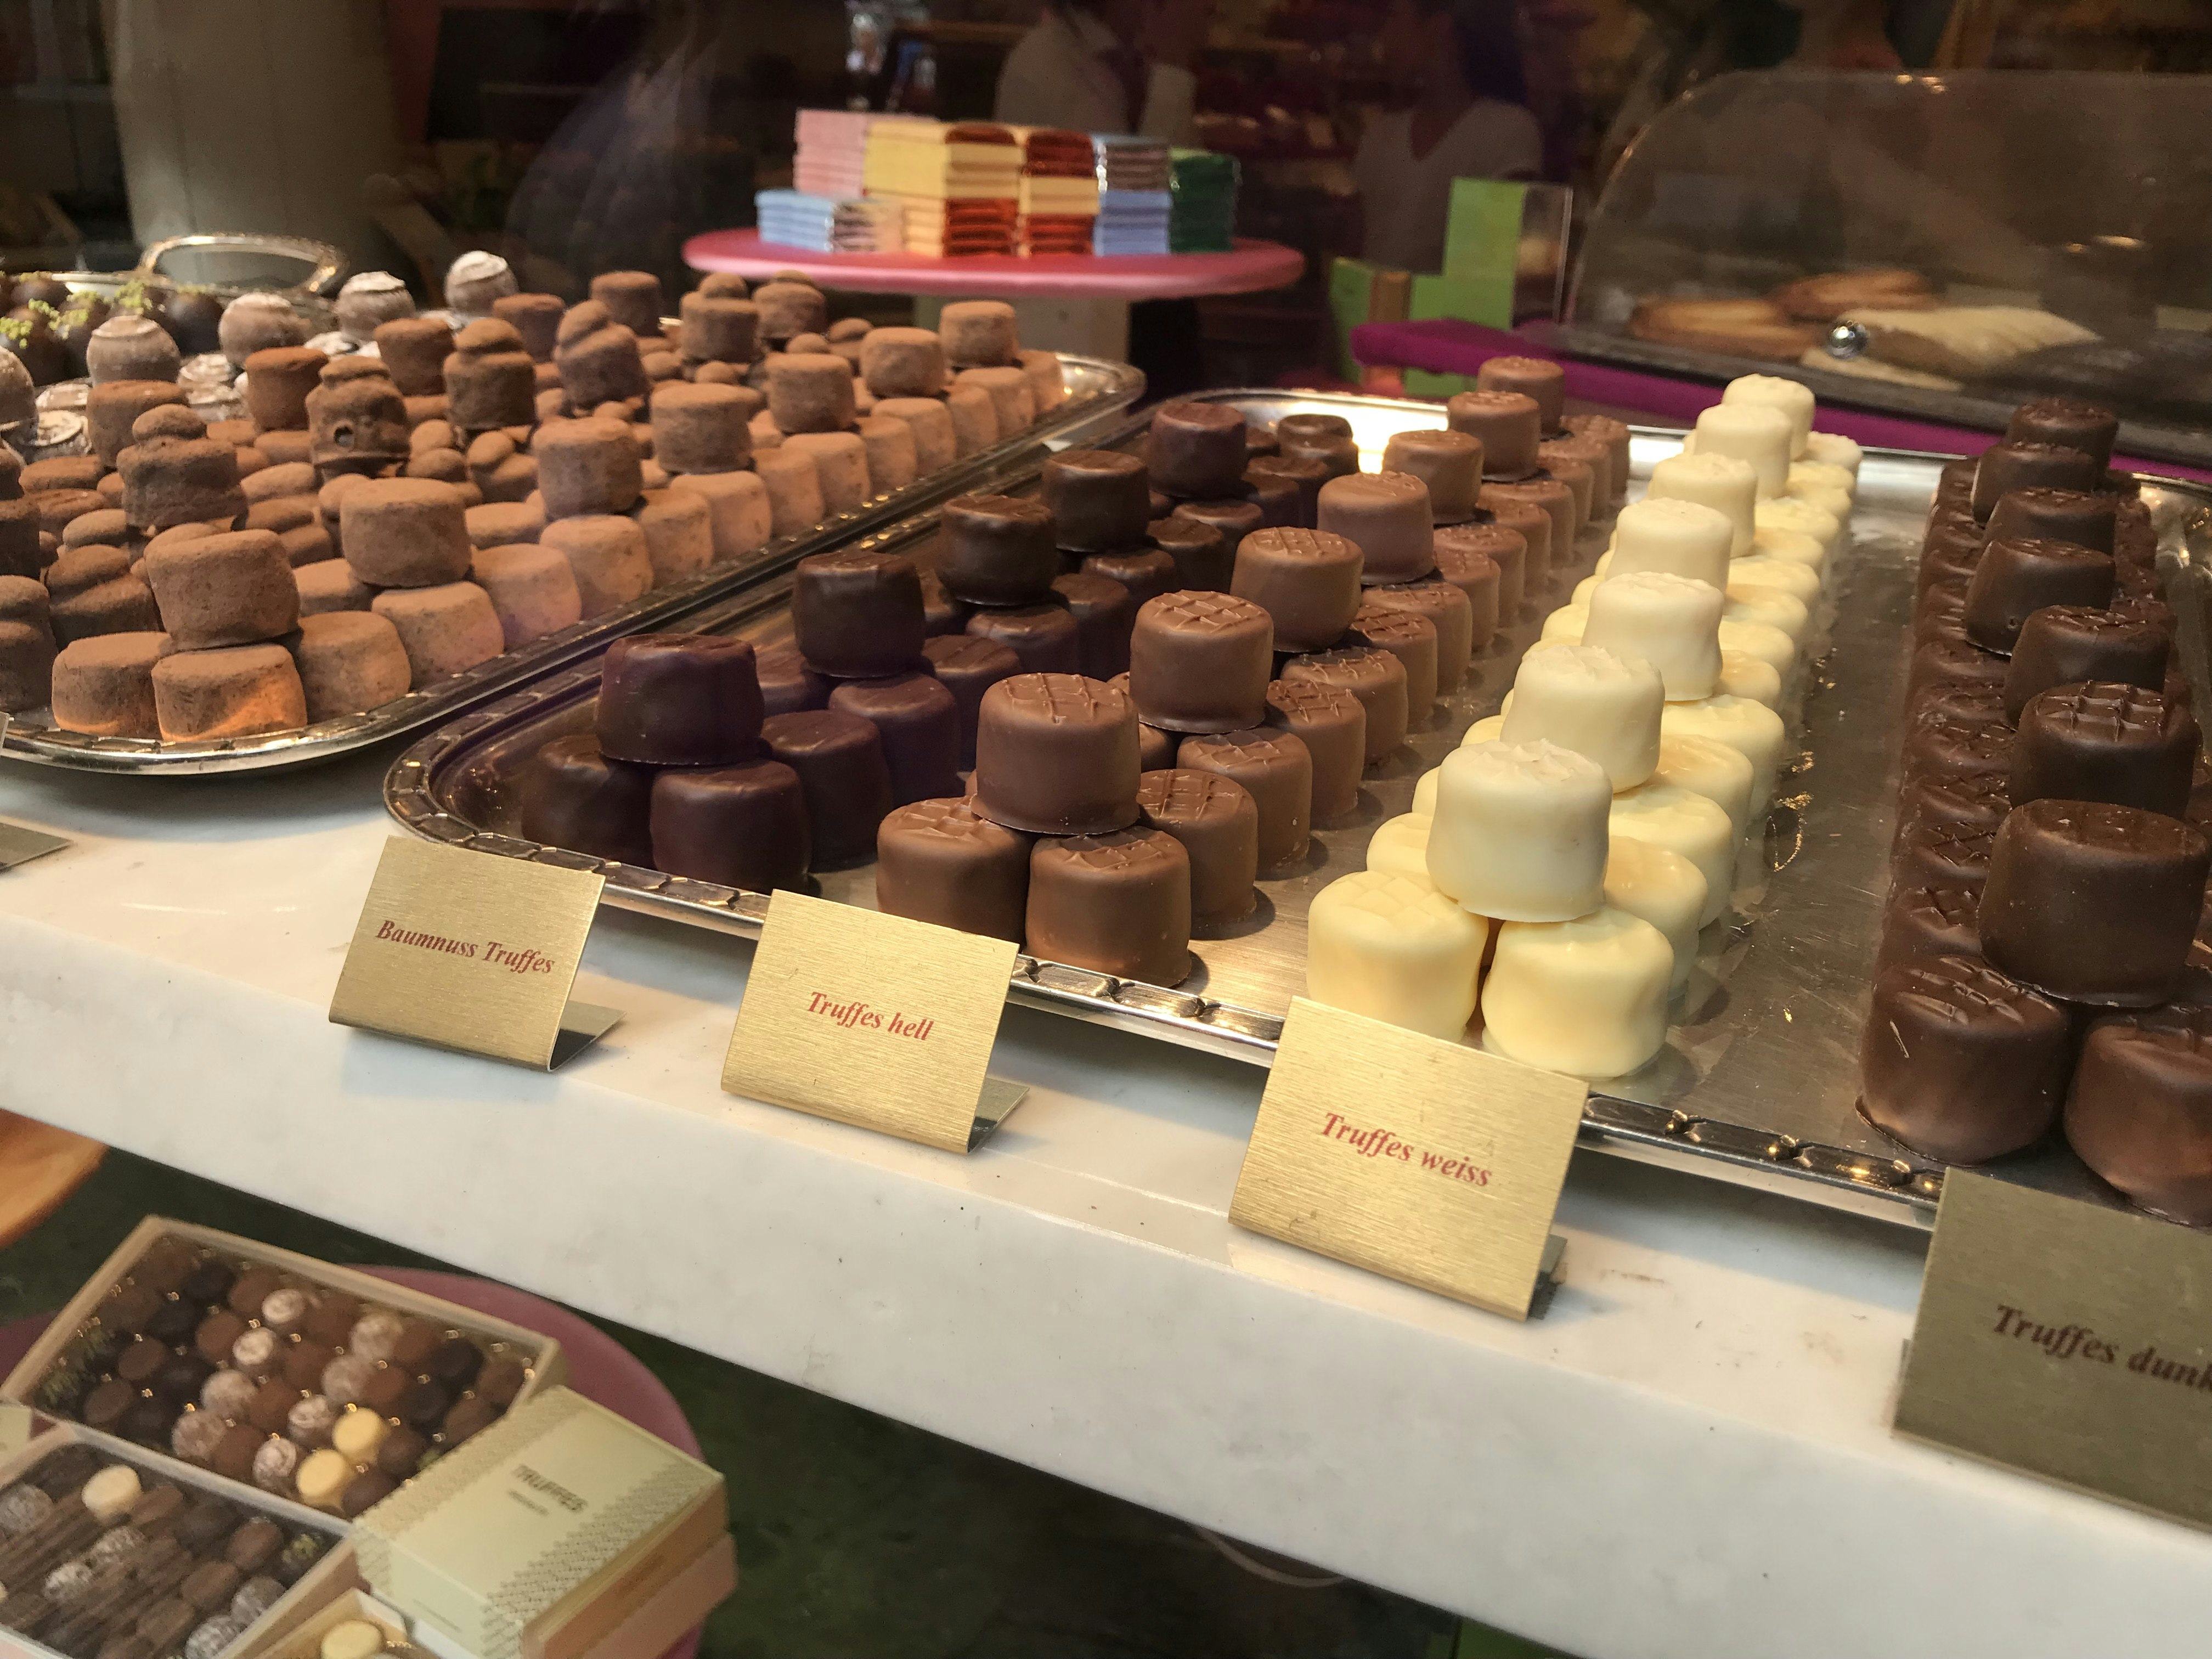 An array of chocolate truffles to choose from on the Bahnhofstrasse, Zurich.